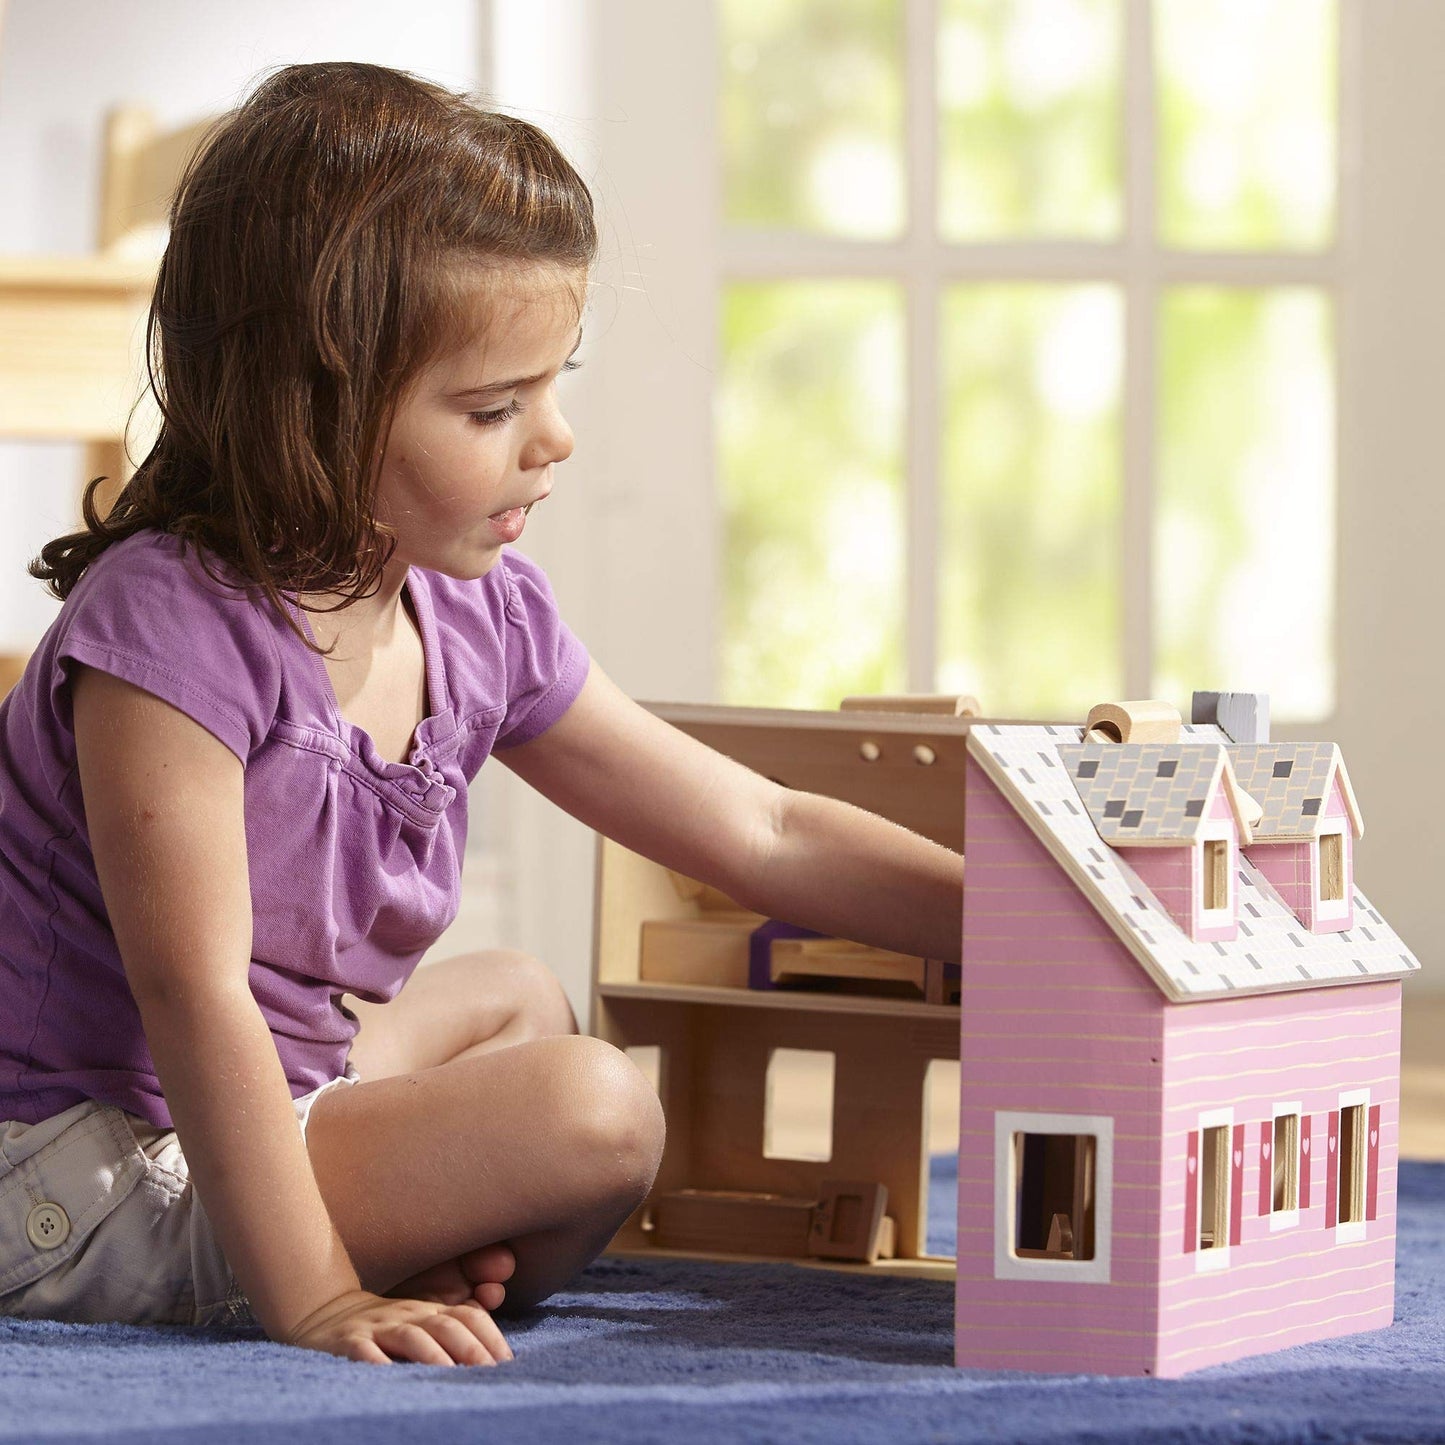 Melissa & Doug Fold and Go Wooden Dollhouse With 2 Dolls and Wooden Furniture,Multi,One Size